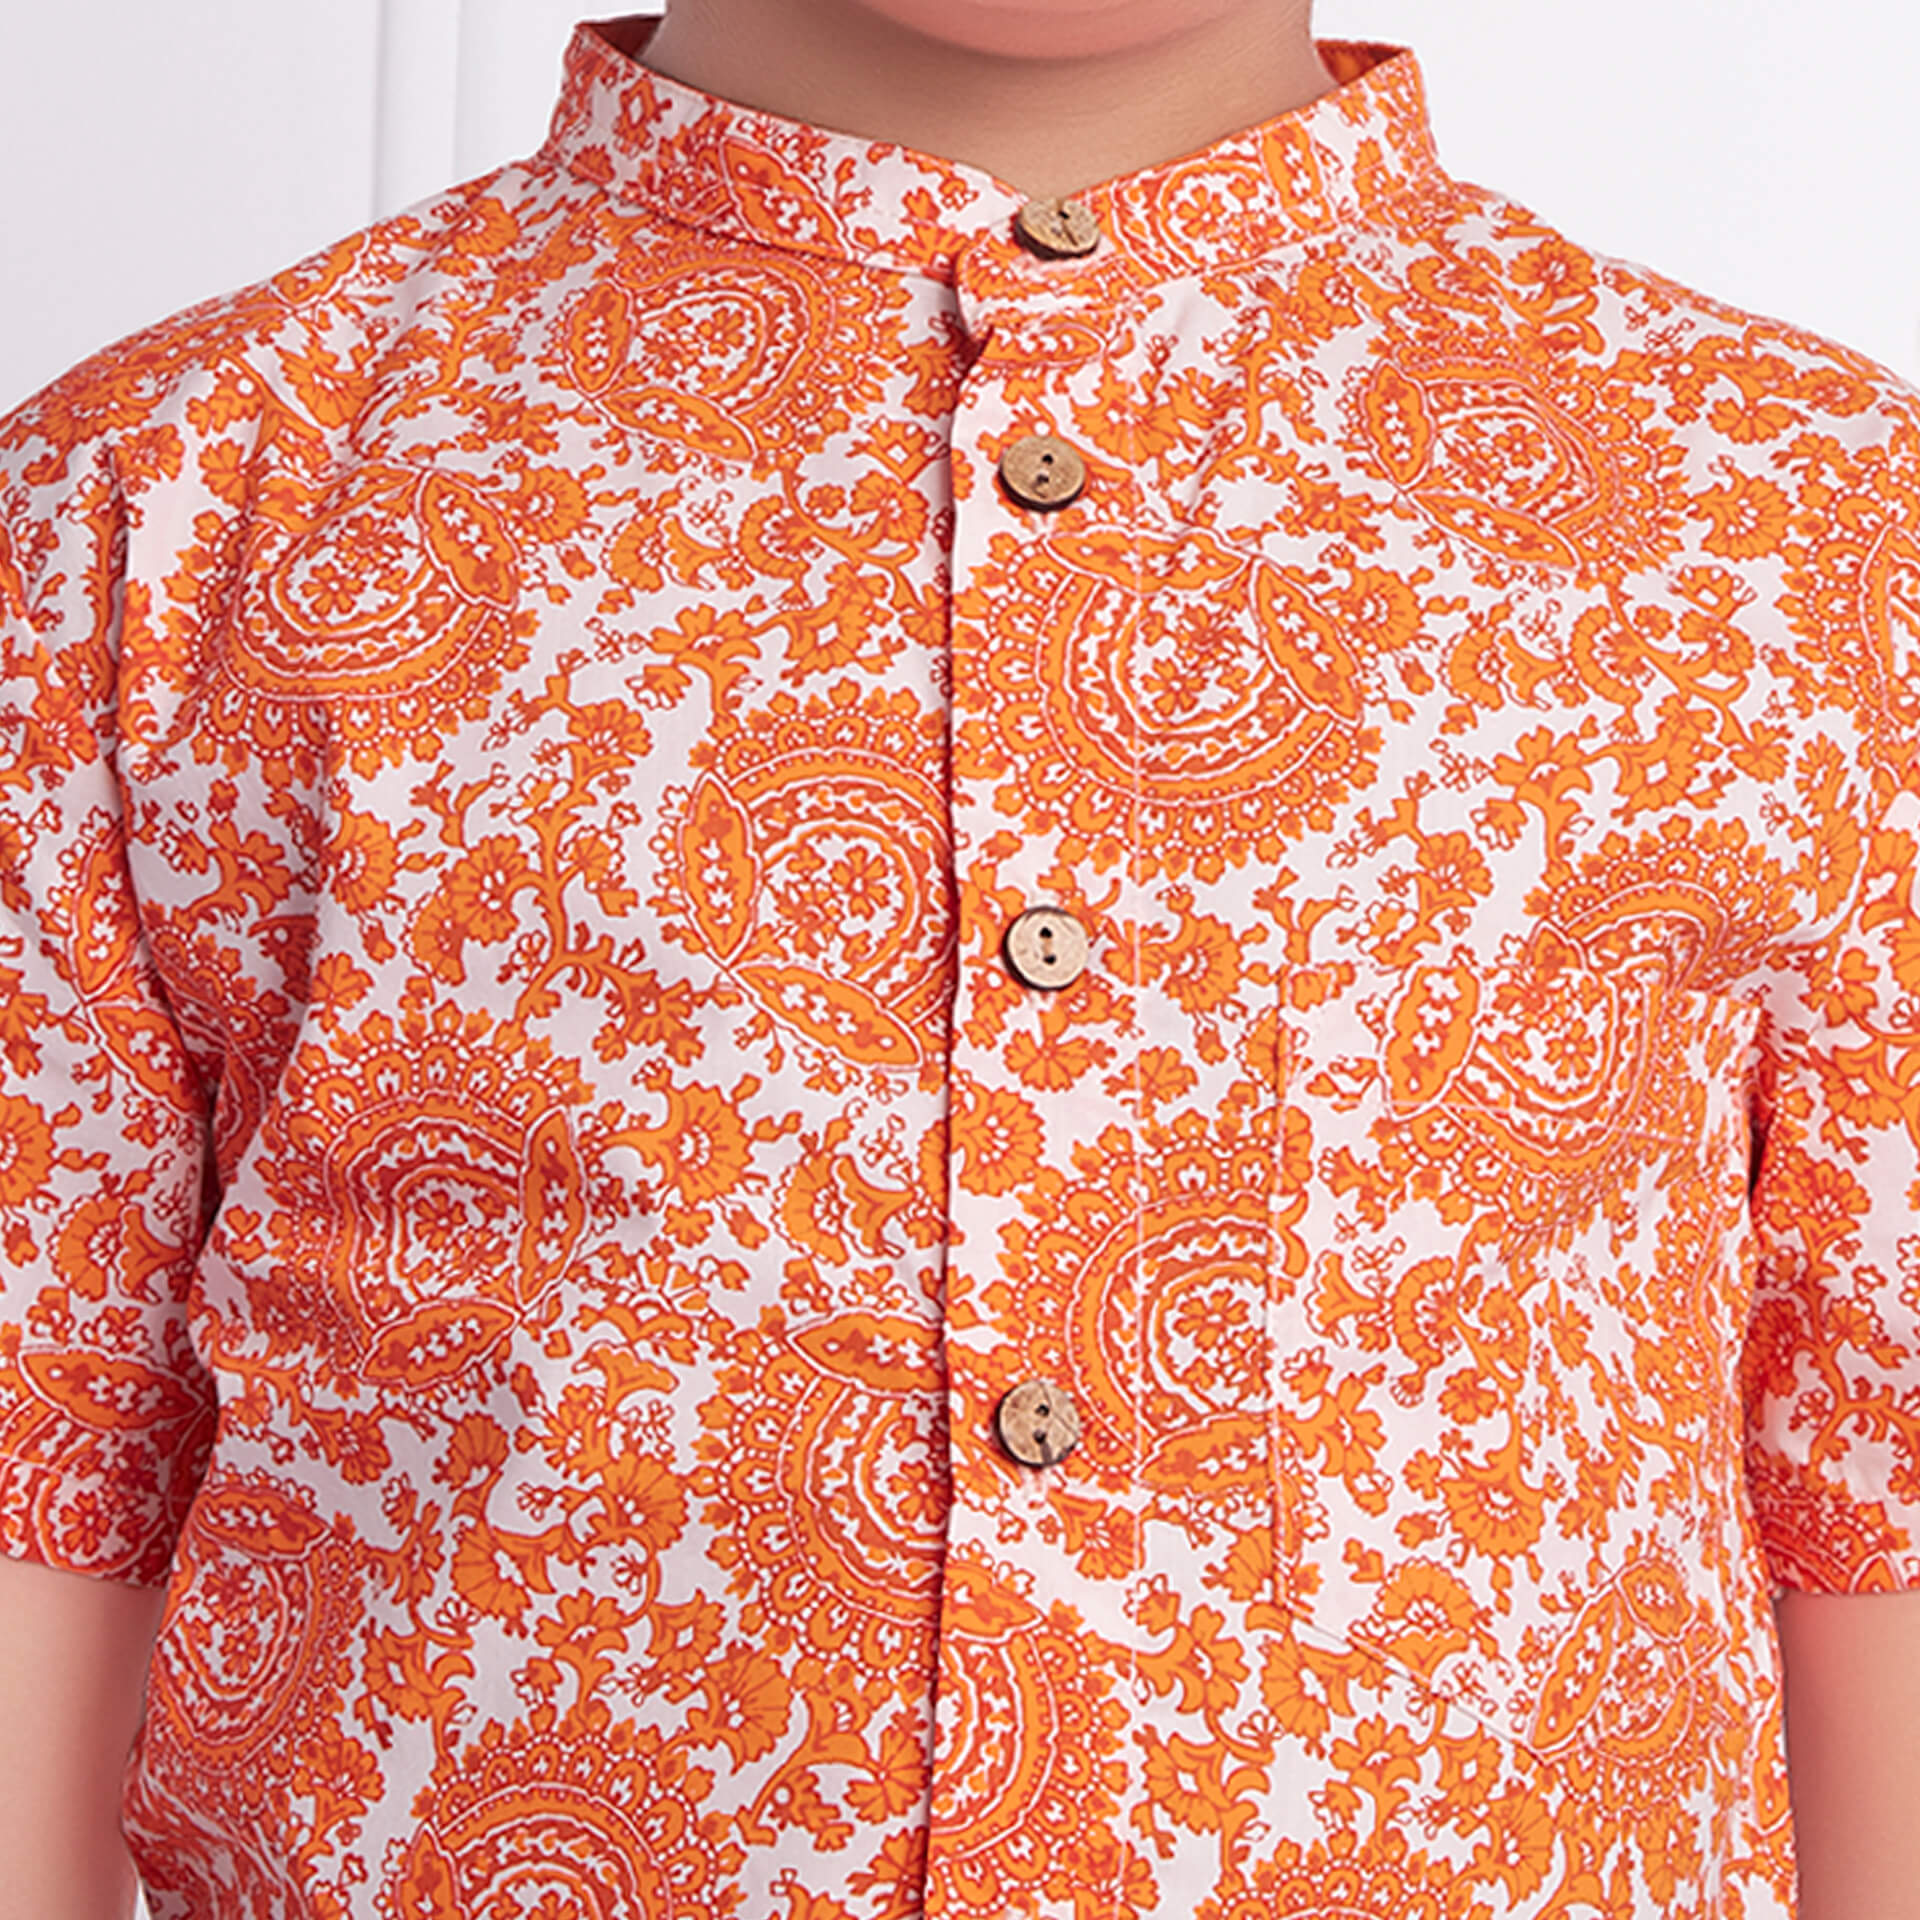 Detail on boys ethnic print shirt with mandarin collar and wood buttons